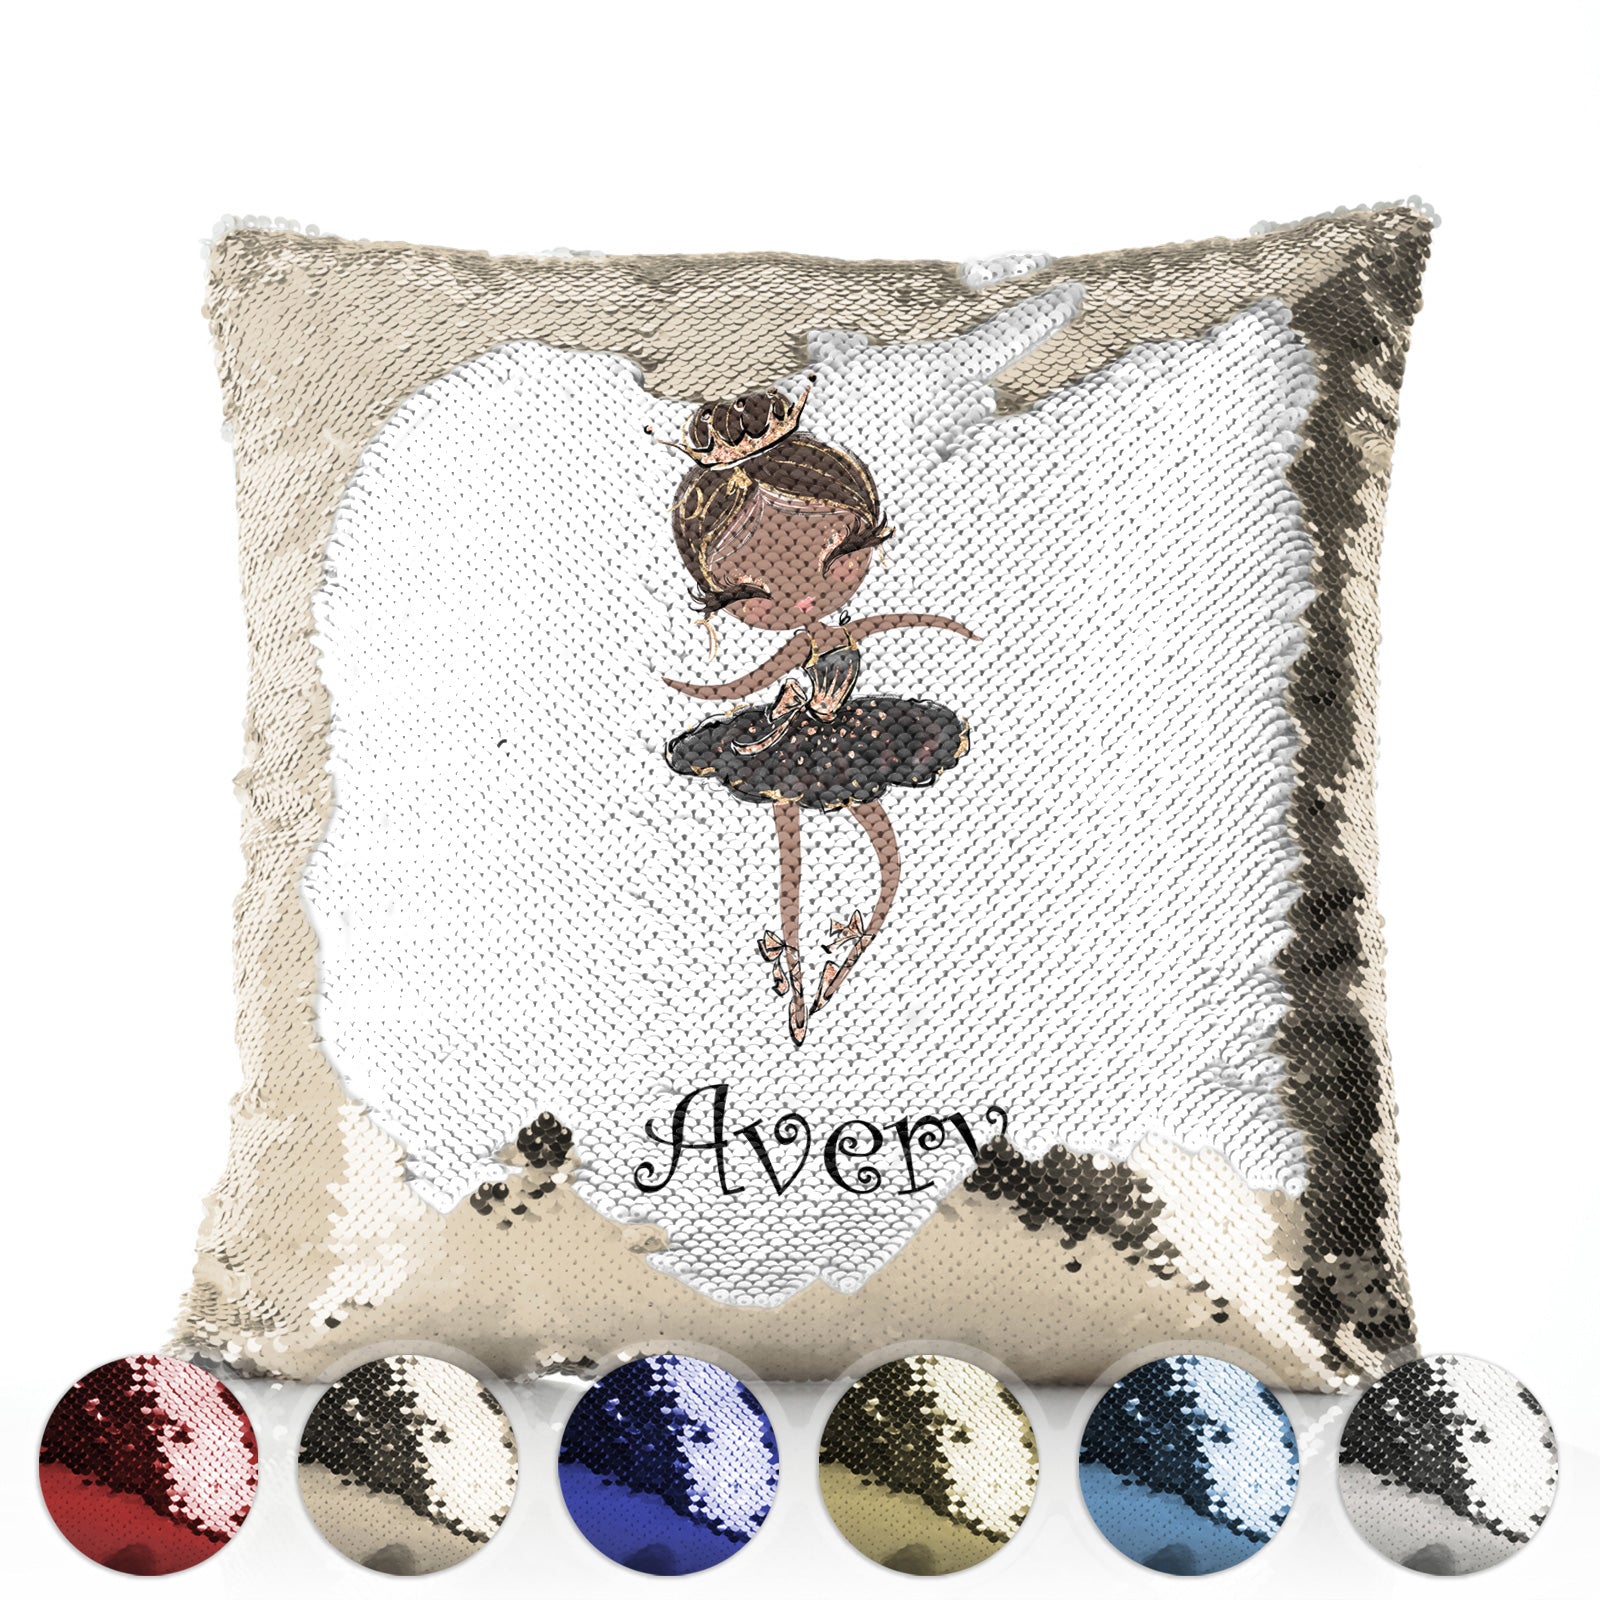 Personalised Sequin Cushion with Cute Text and Black Hair Black Dress Tiara Ballerina